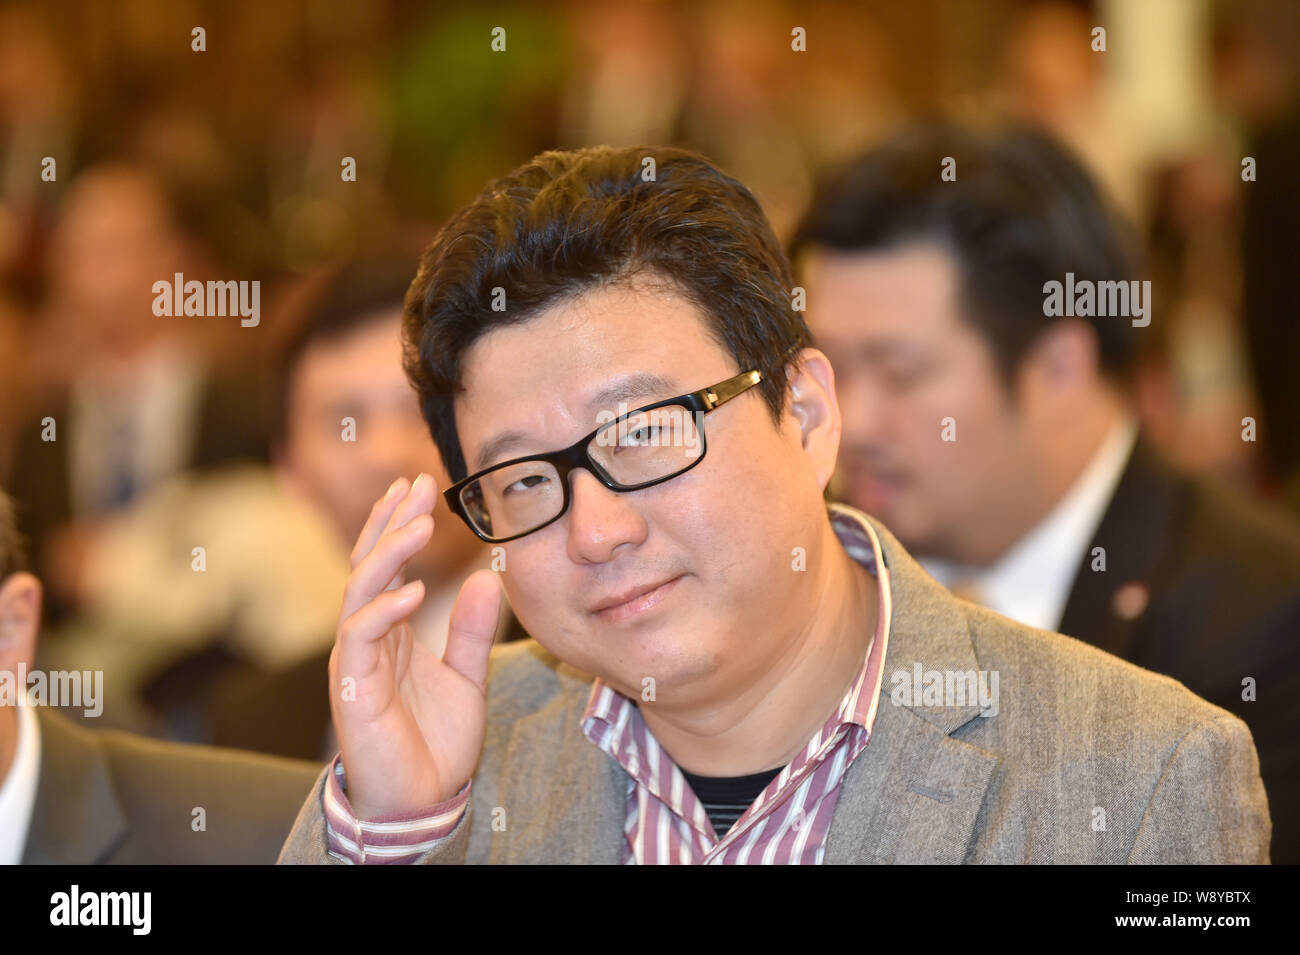 William Ding Lei, CEO of NetEase (163.com), attends the First World Internet Conference, also known as Wuzhen Summit, in Wuzhen, an ancient town in To Stock Photo